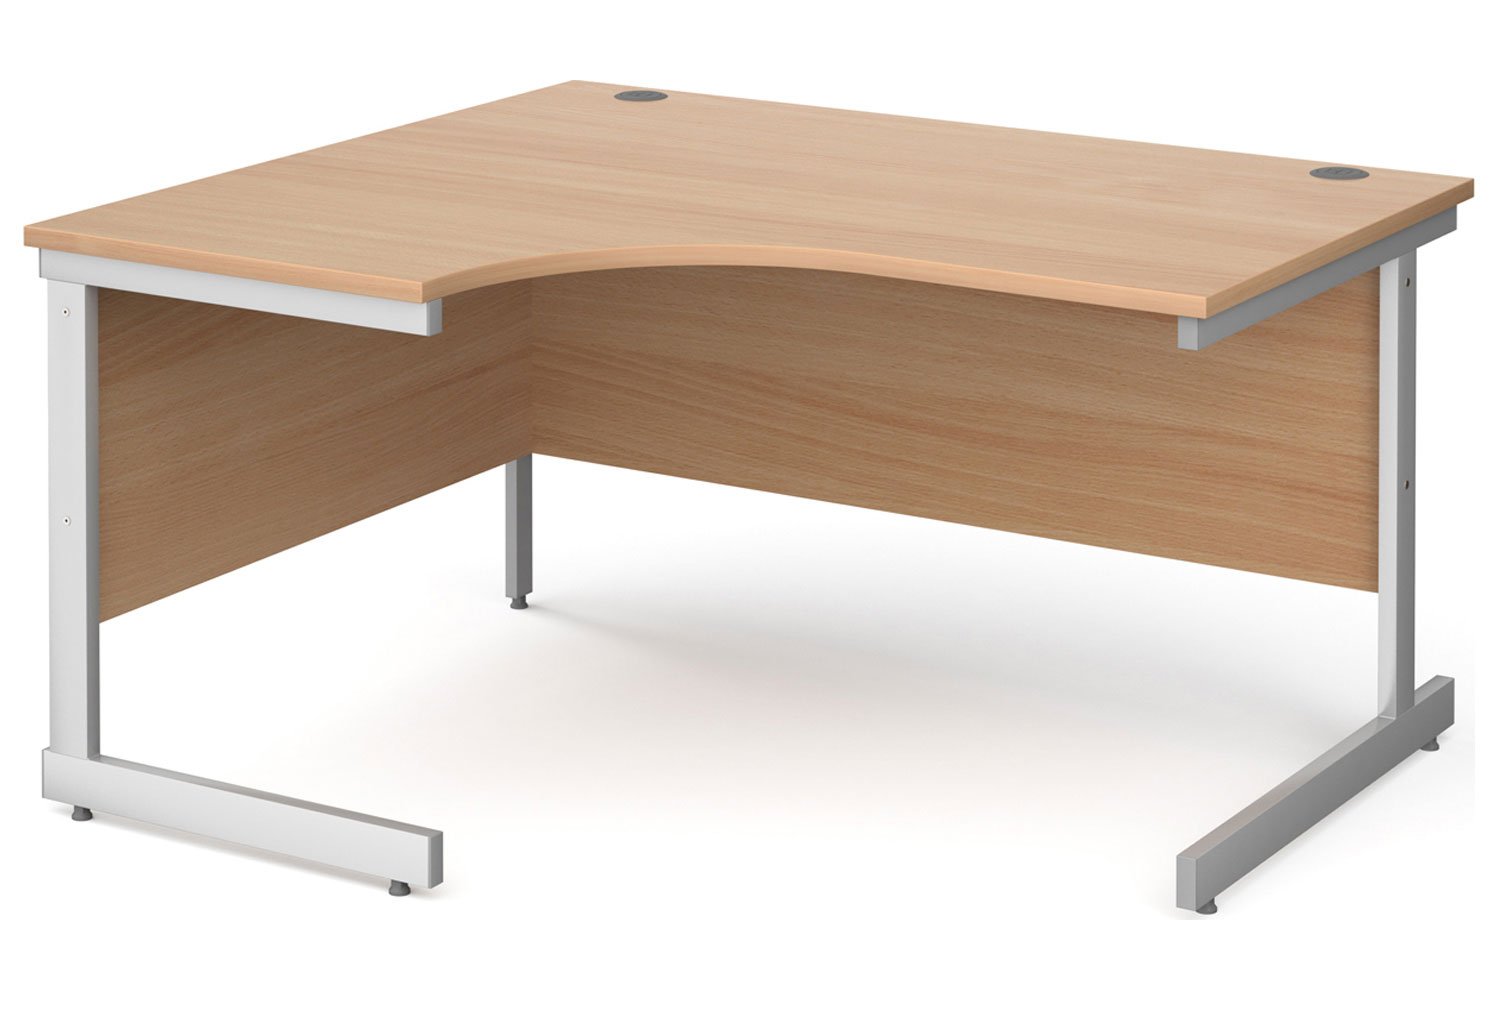 Tully I Left Hand Ergonomic Office Desk, 140wx120/80dx73h (cm), Beech, Express Delivery